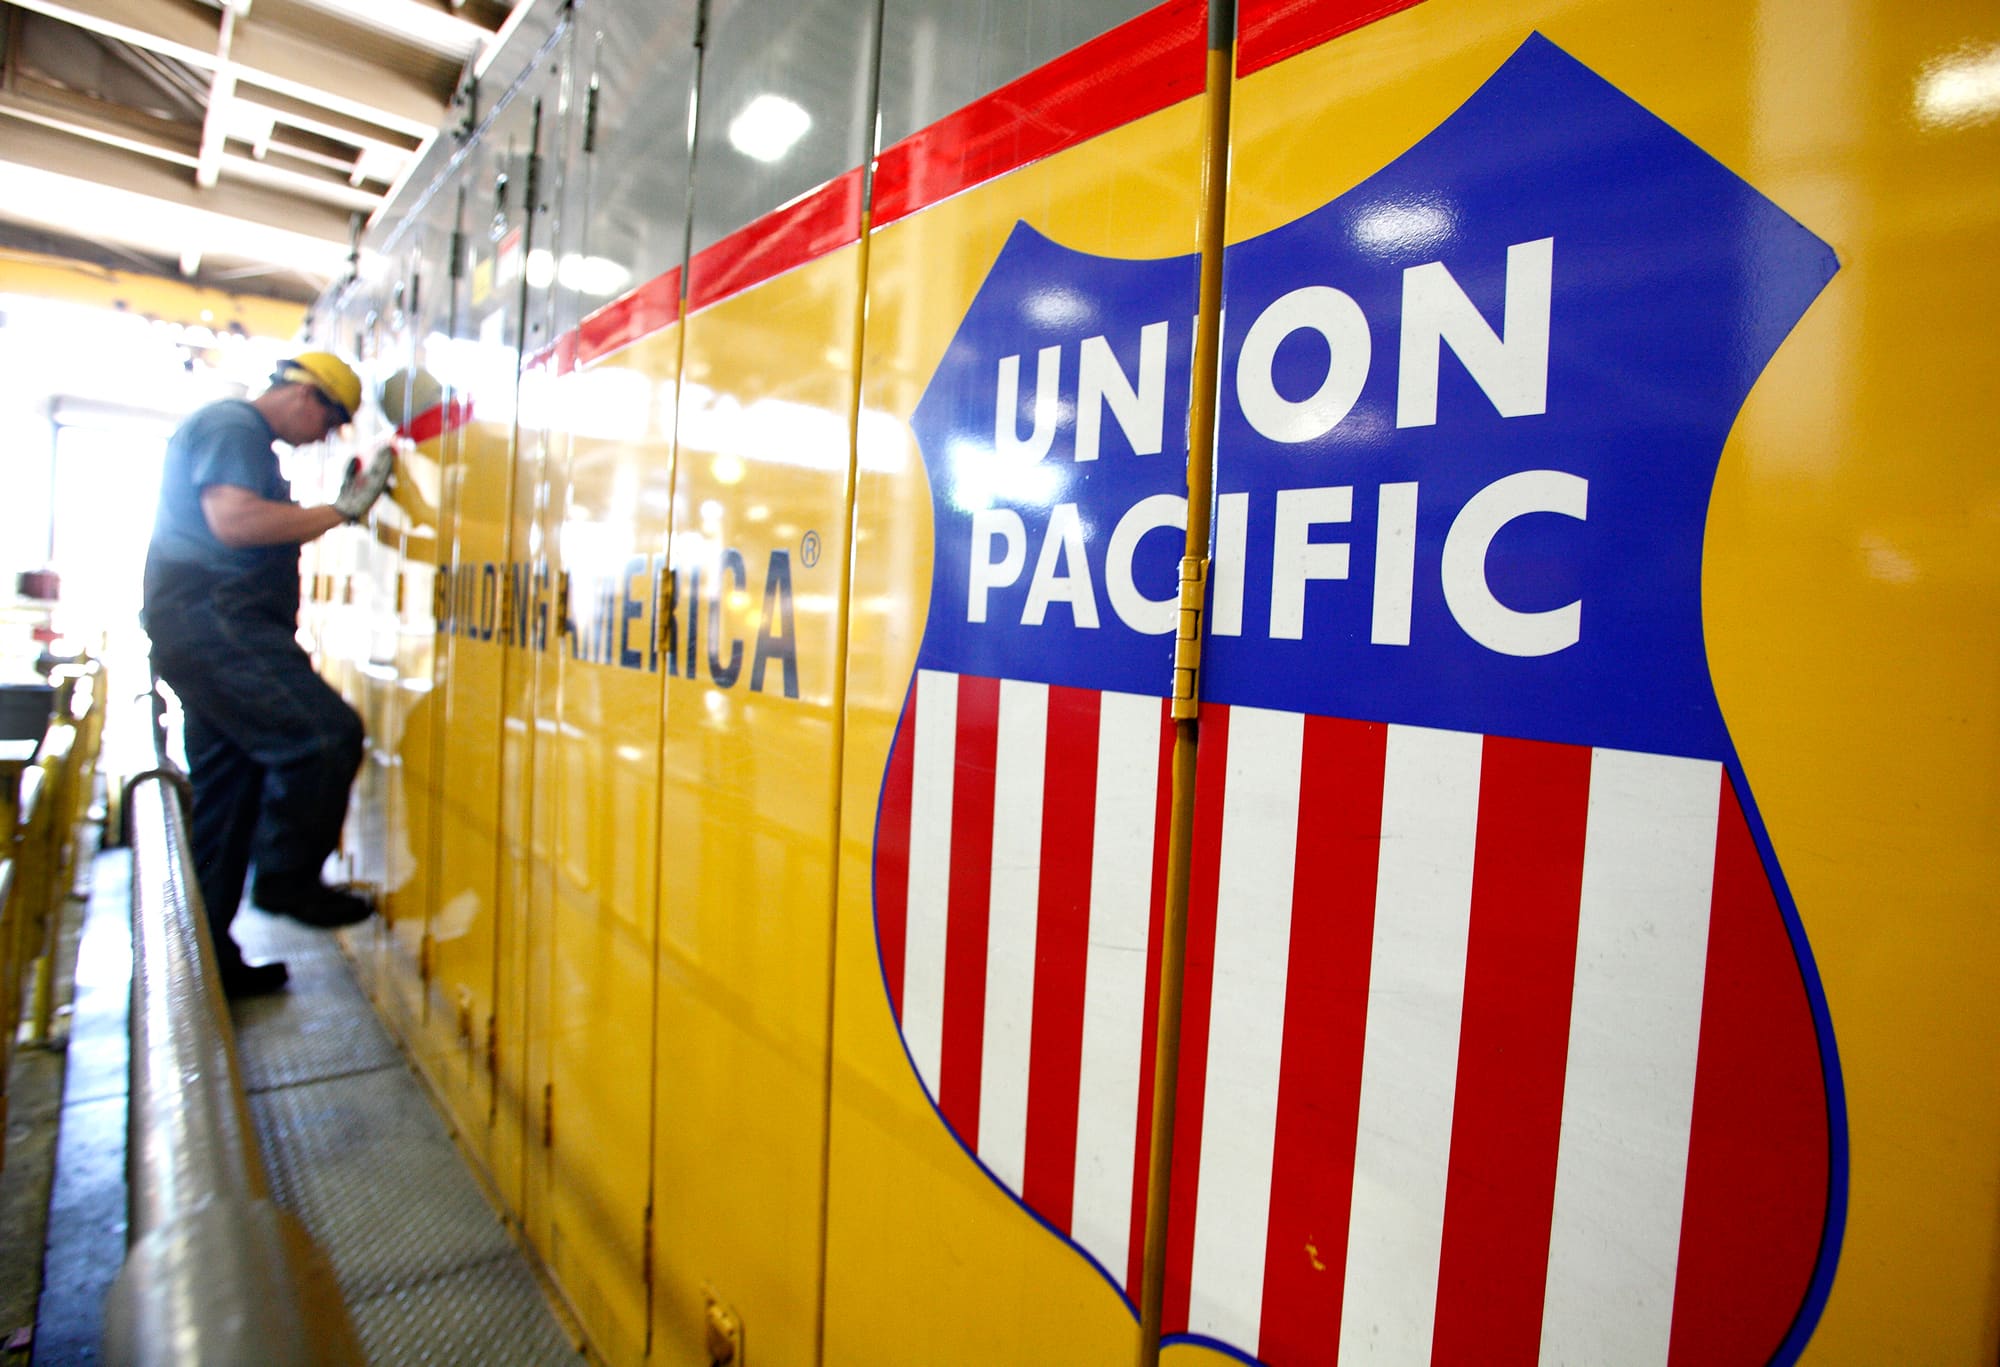 Union Pacific is best railroad stock to own in this market